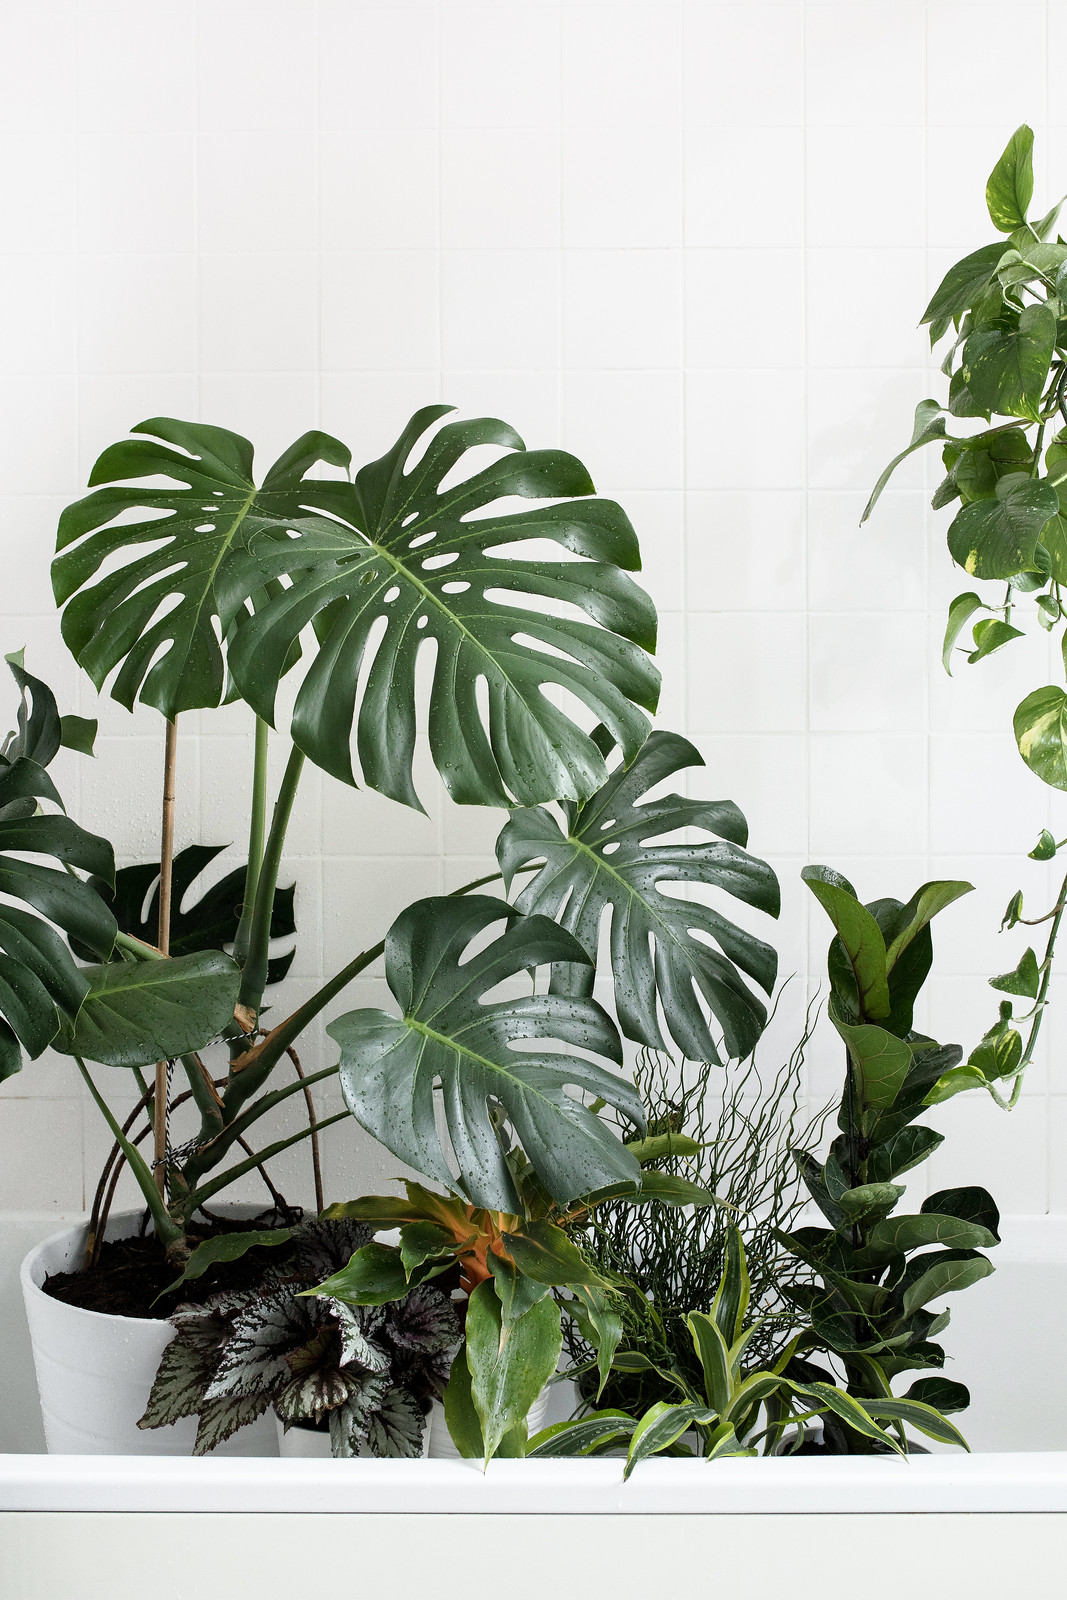 Taking Care Of Houseplants When On Vacation